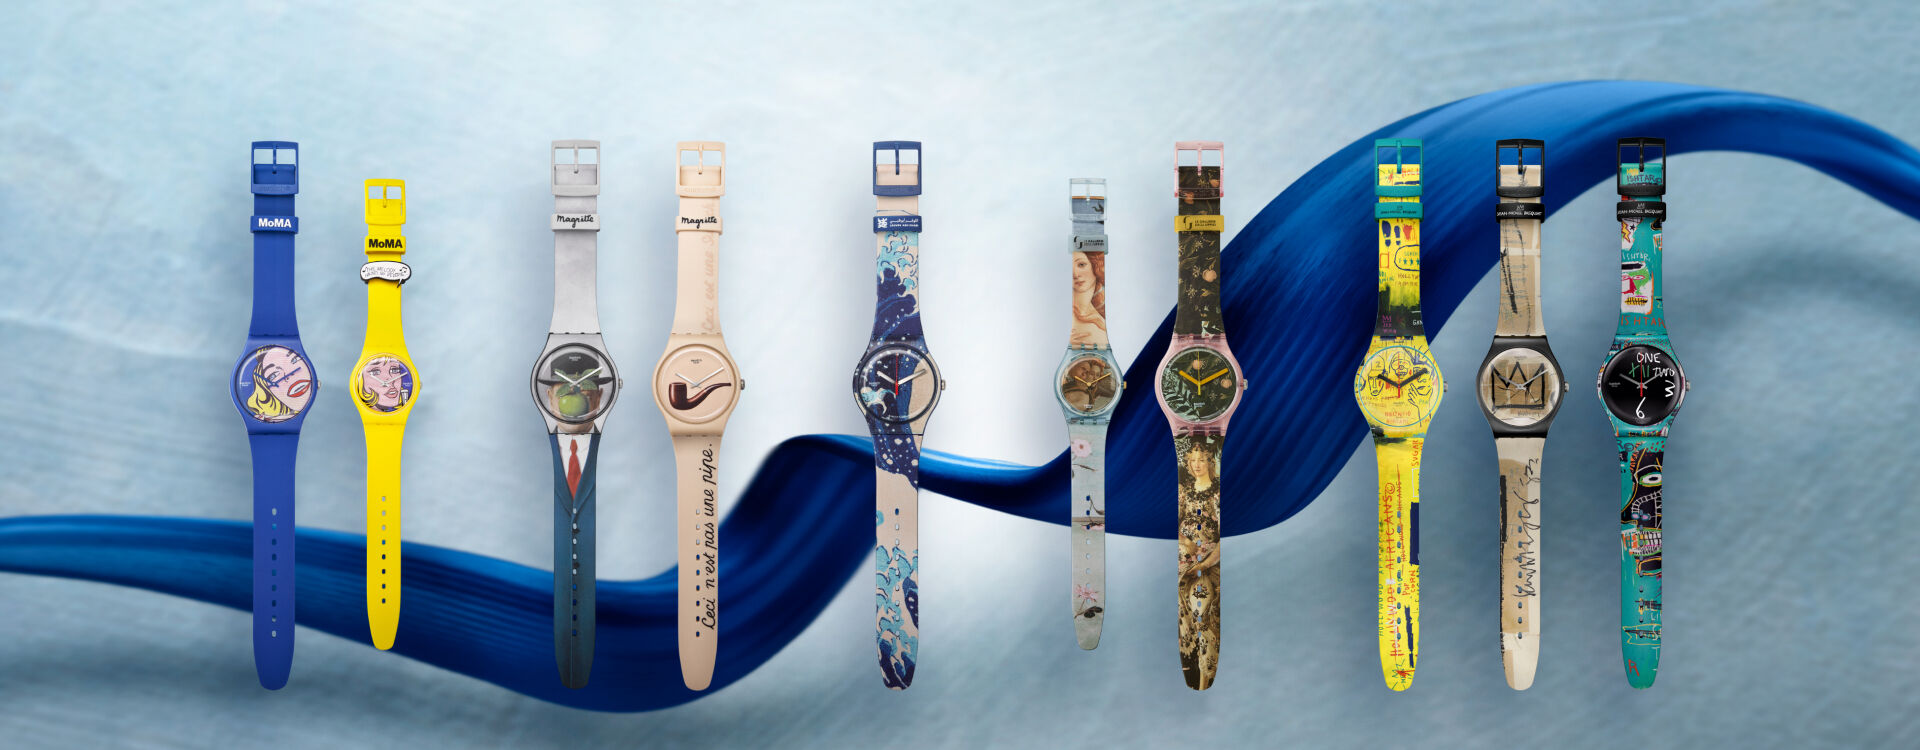 The Dial as Canvas: Six Watches From Artistic Collaborations